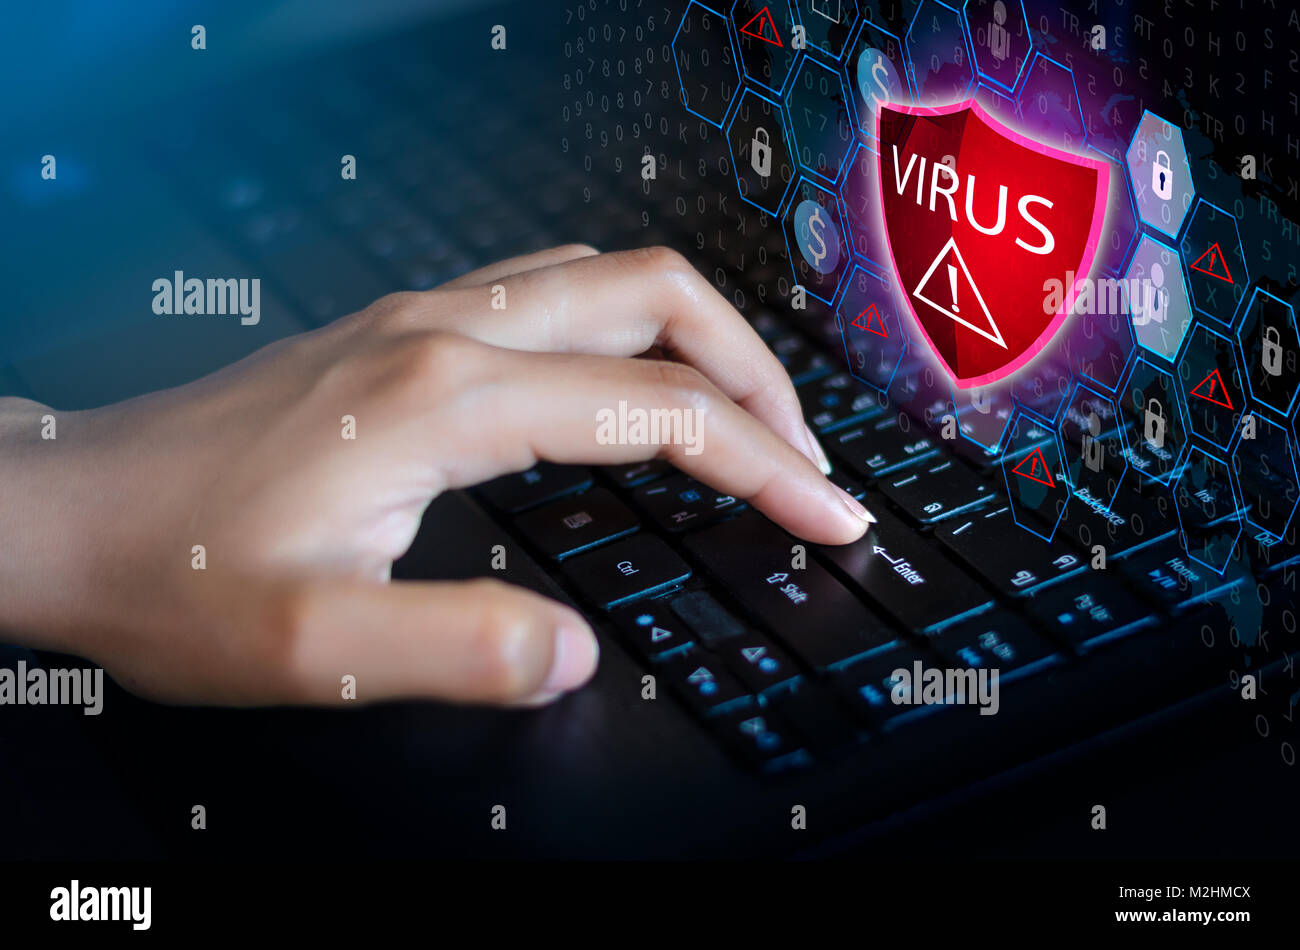 Press enter button on the keyboard computer Protective shield virus red Exclamation Warning Caution Computer in dark with word virus Stock Photo